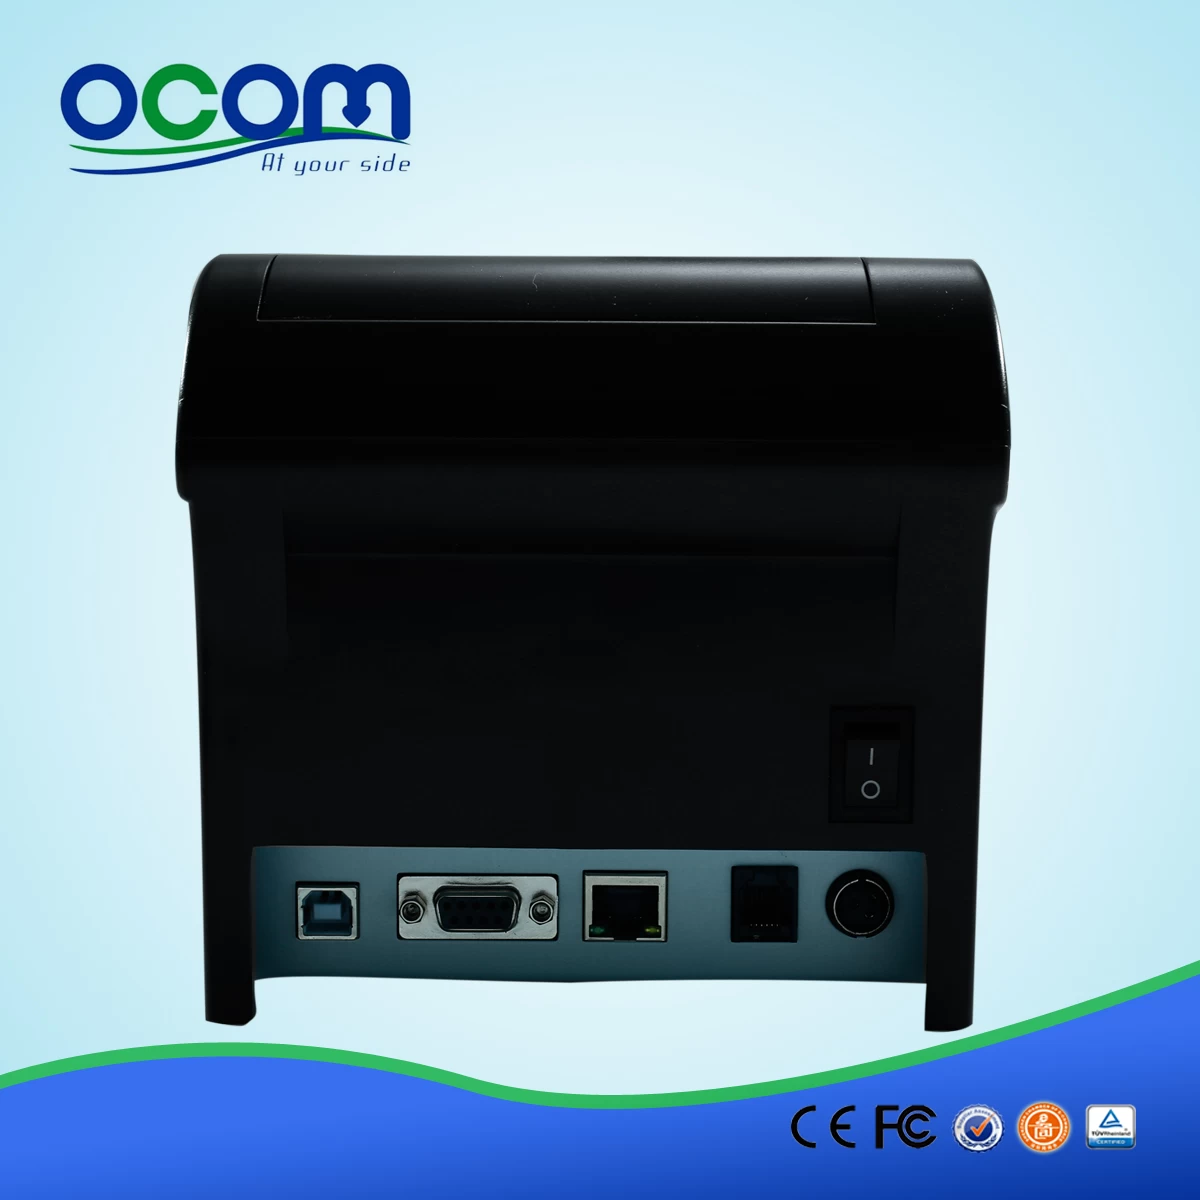 WIFI Thermal Printer 3 inch Android OS OCPP-806-W